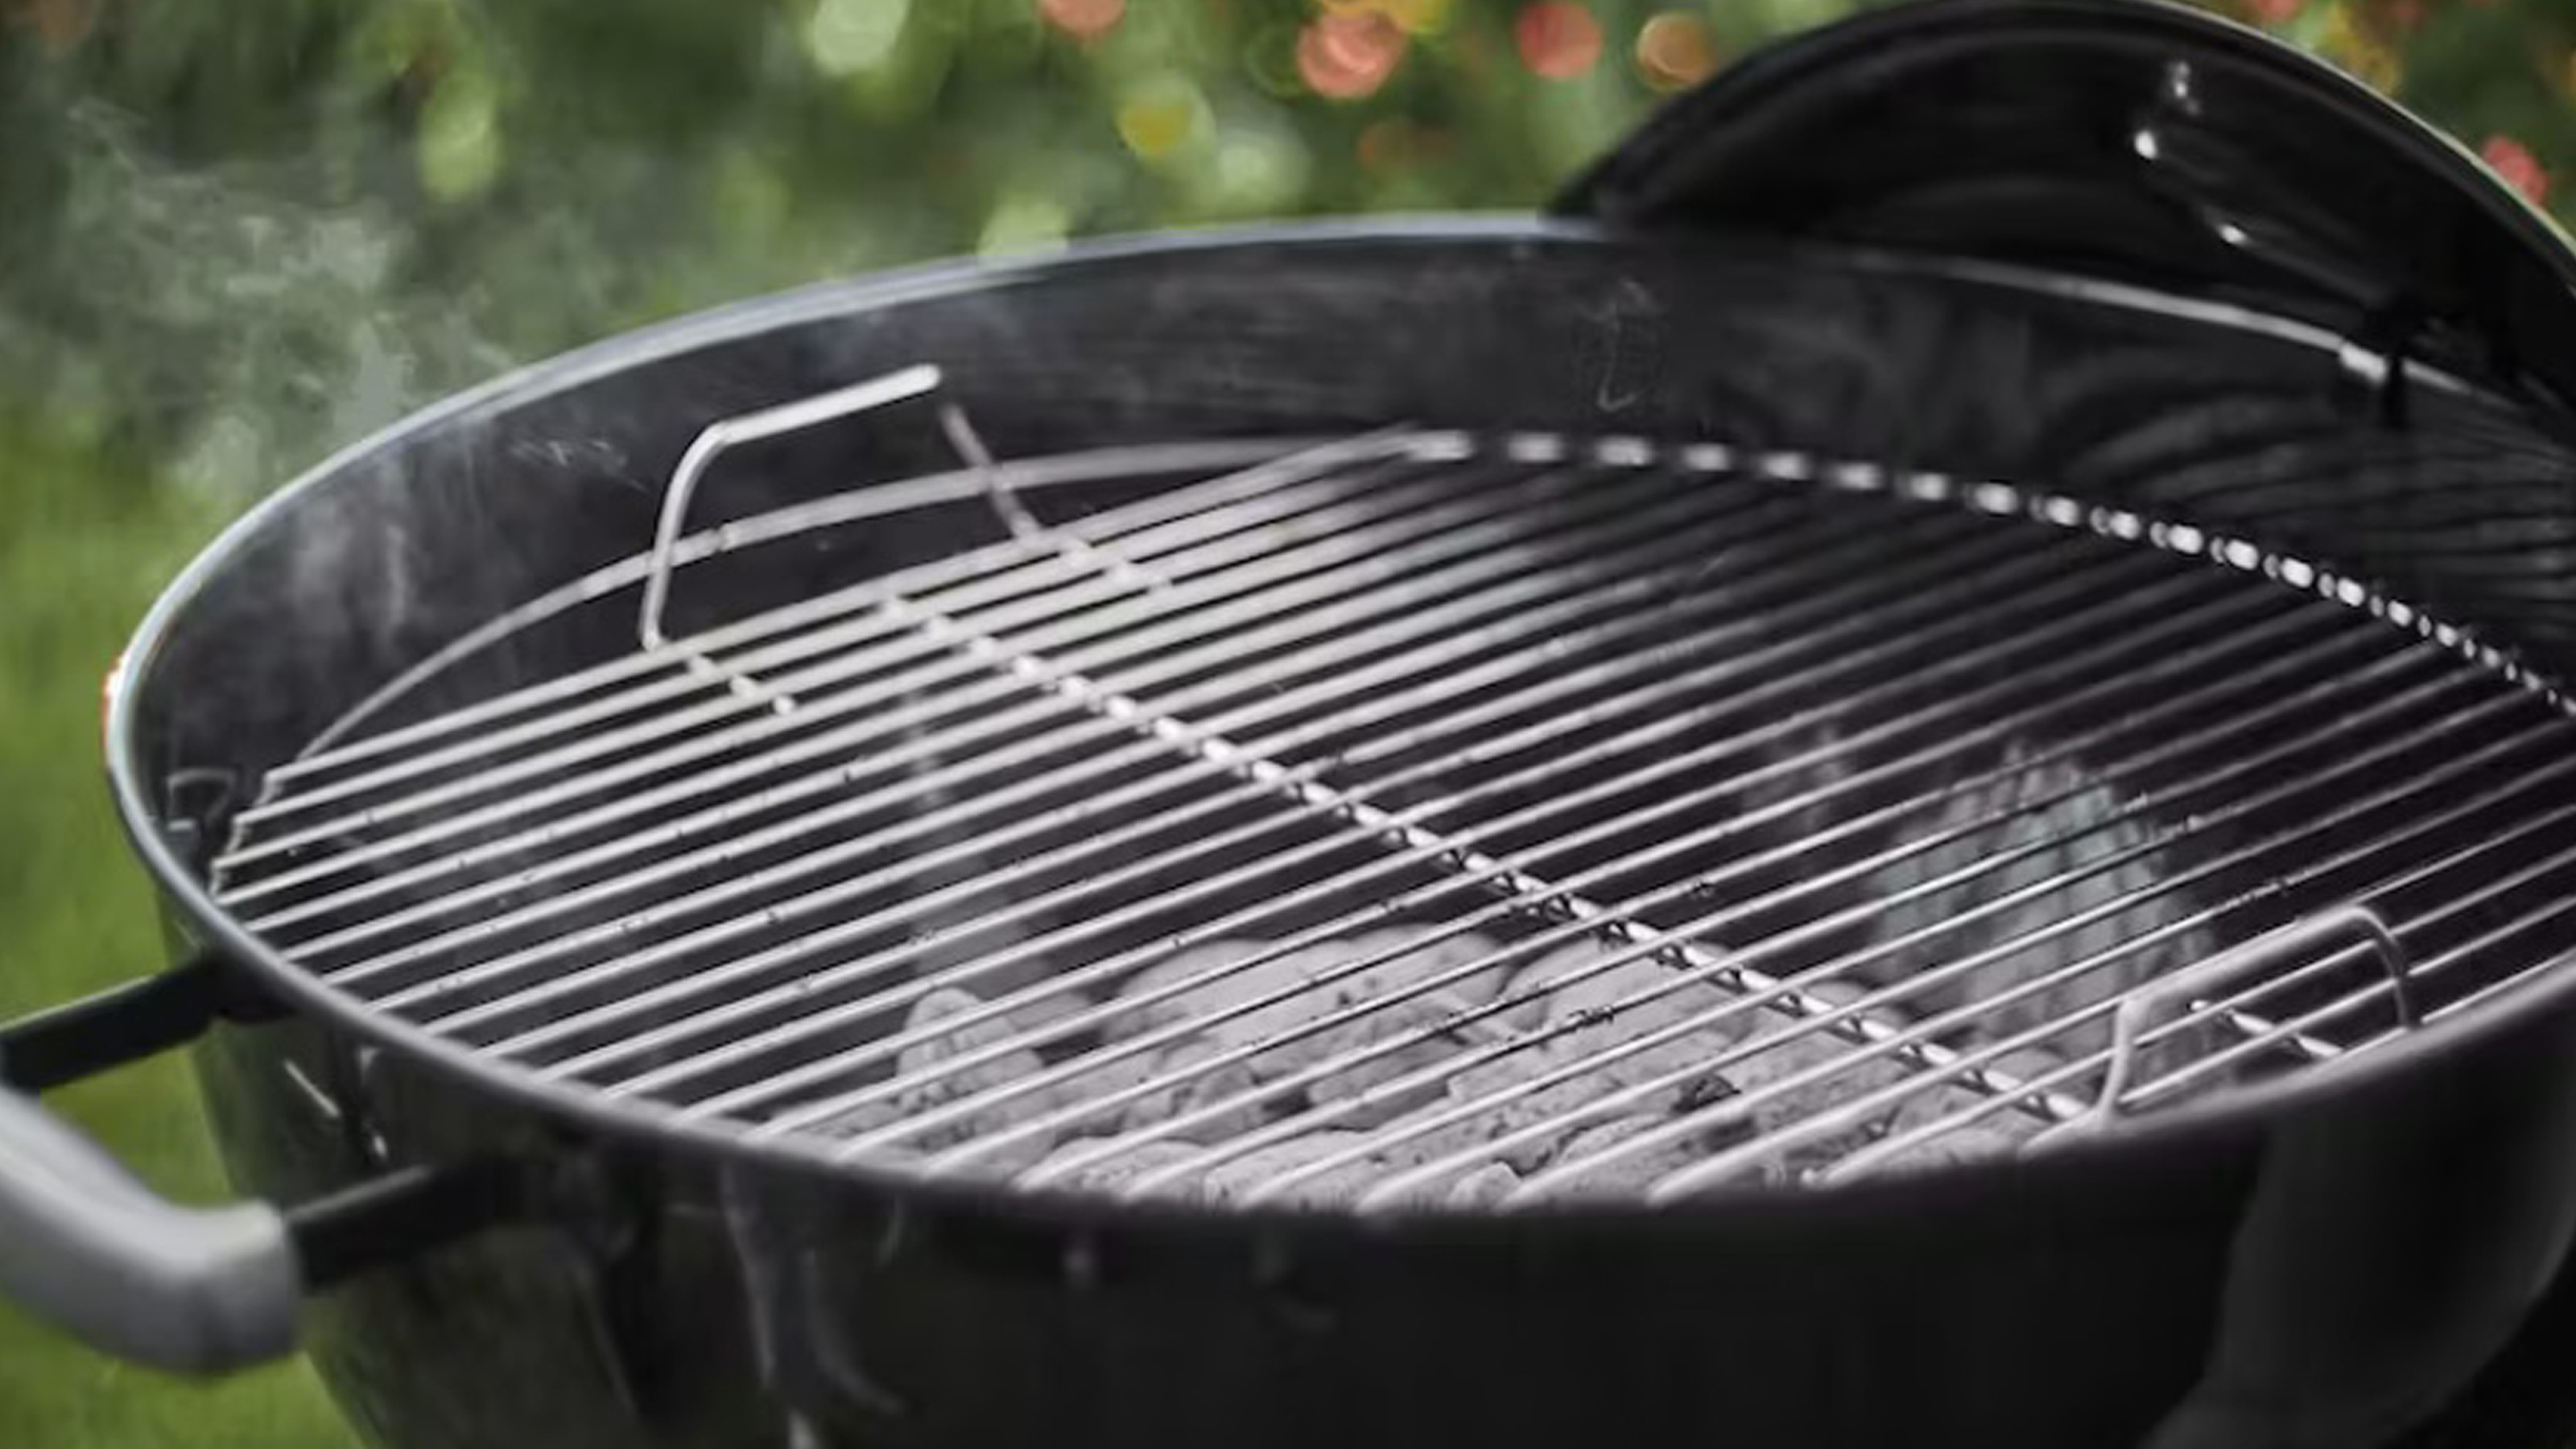 Weber Original Kettle E4710 review: we tried out the iconic Weber Kettle BBQ  to see if it's still a worthwhile buy